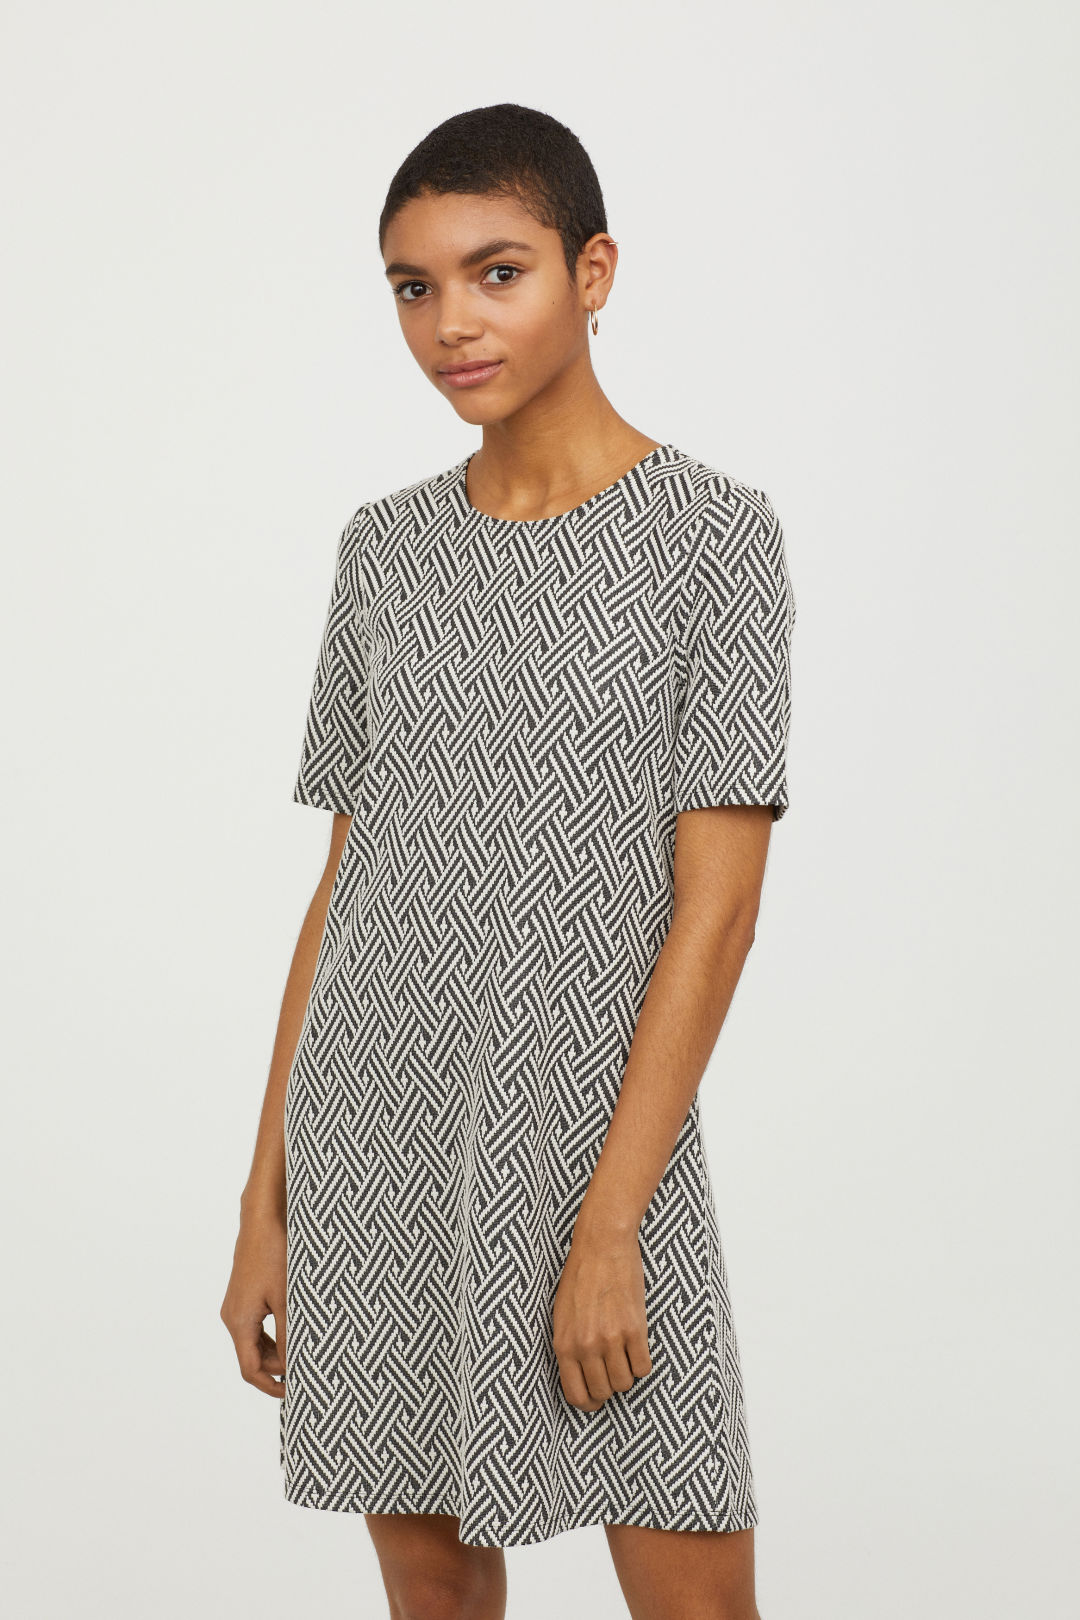  A-lined jersey jaquard dress with exposed zipper detail at back 